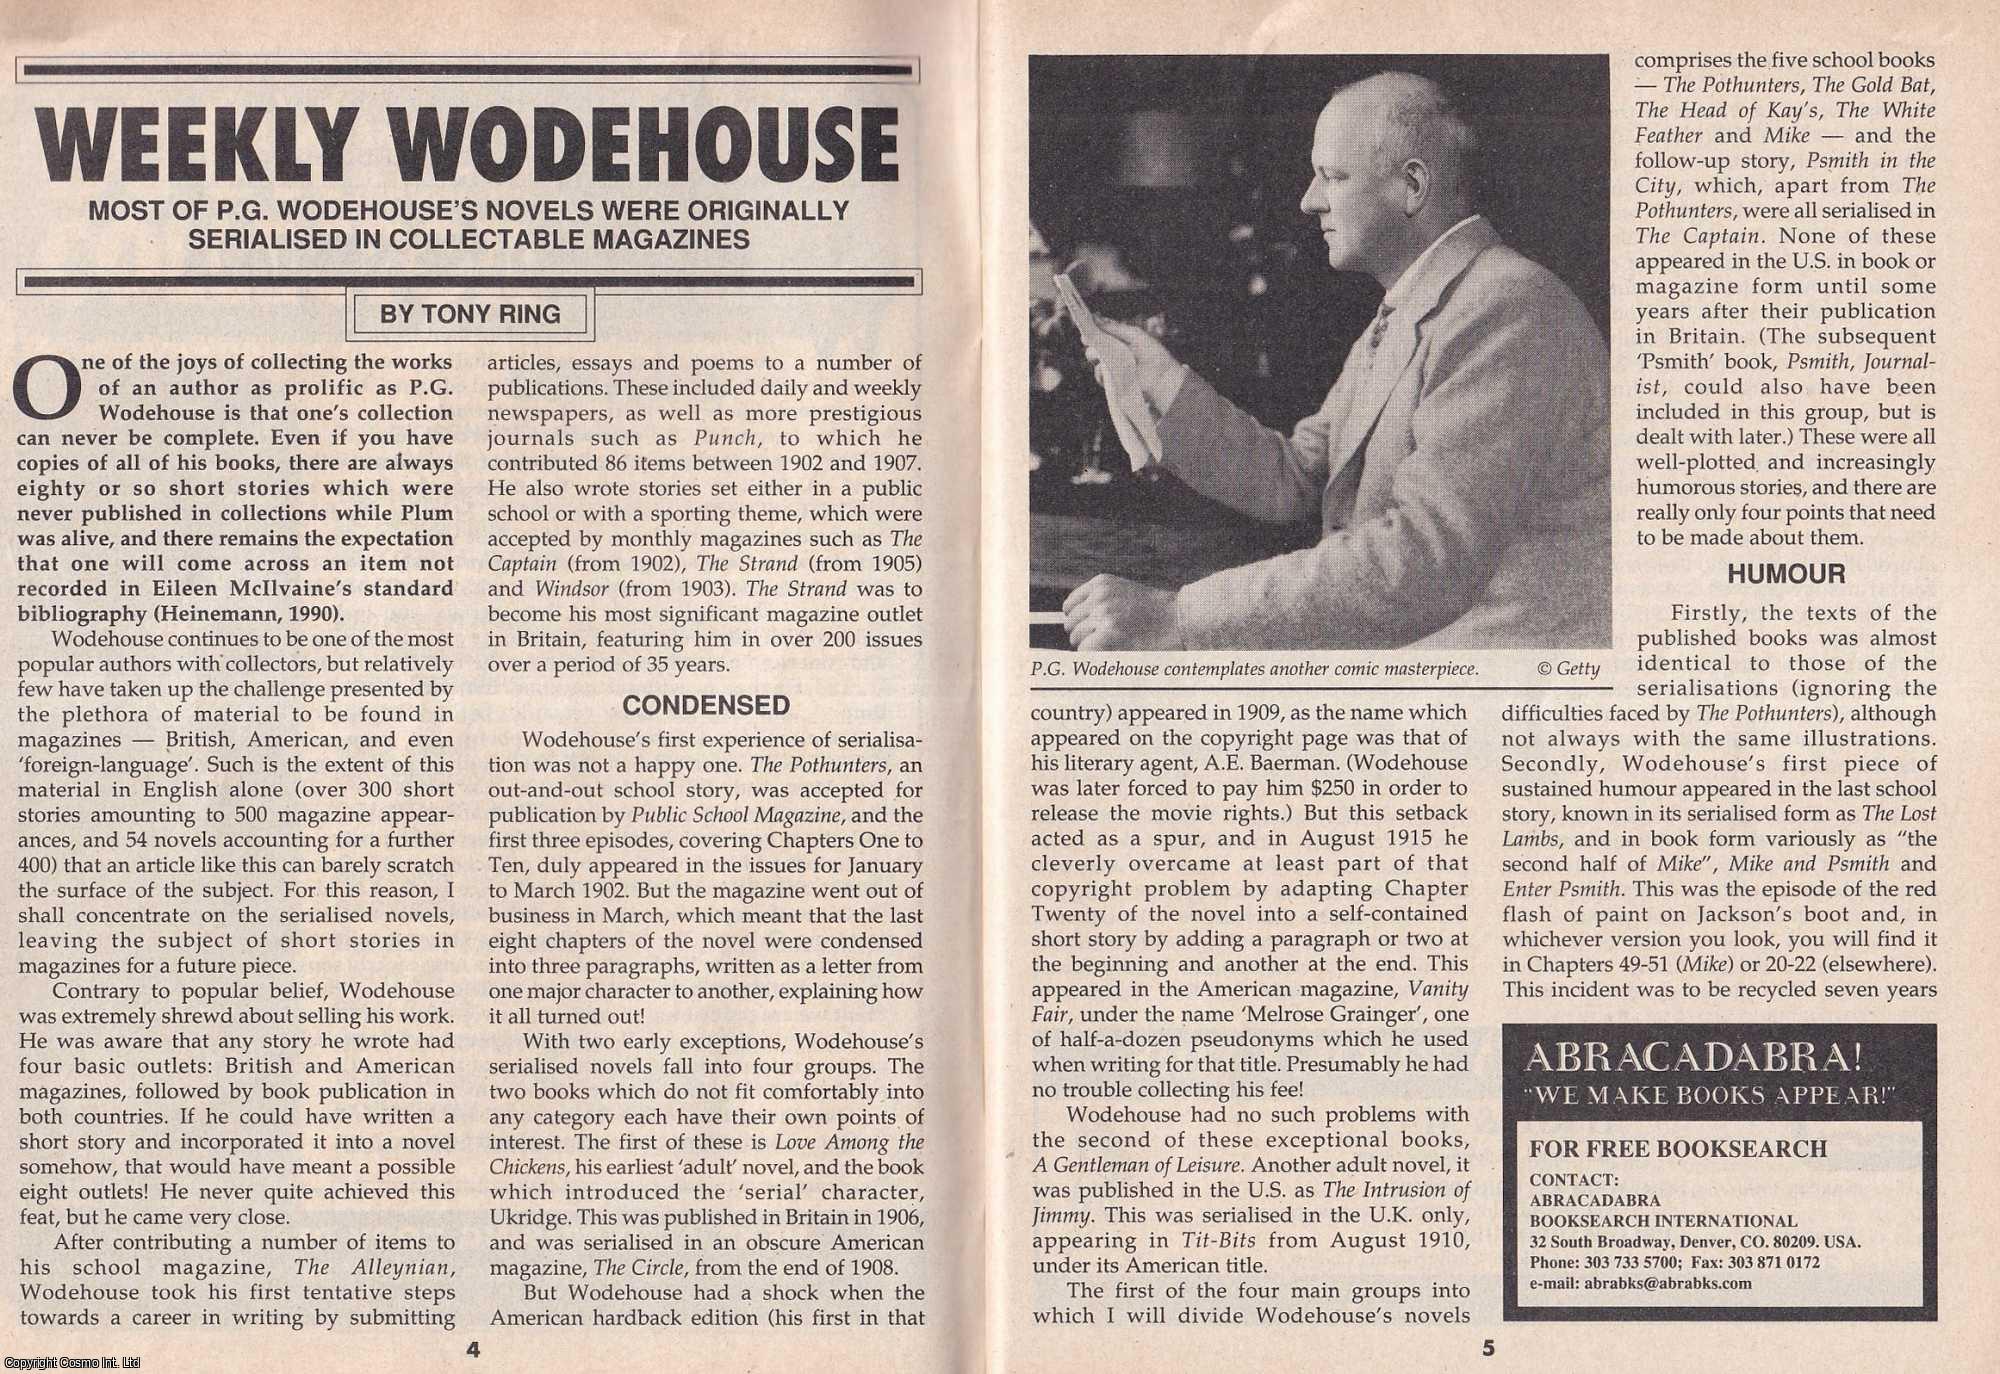 Tony Ring - Weekly Sir Pelham Grenville Wodehouse : Most of P.G. Wodehouse's Novels were Originally Serialised in Collectable Magazines. This is an original article separated from an issue of The Book & Magazine Collector publication.